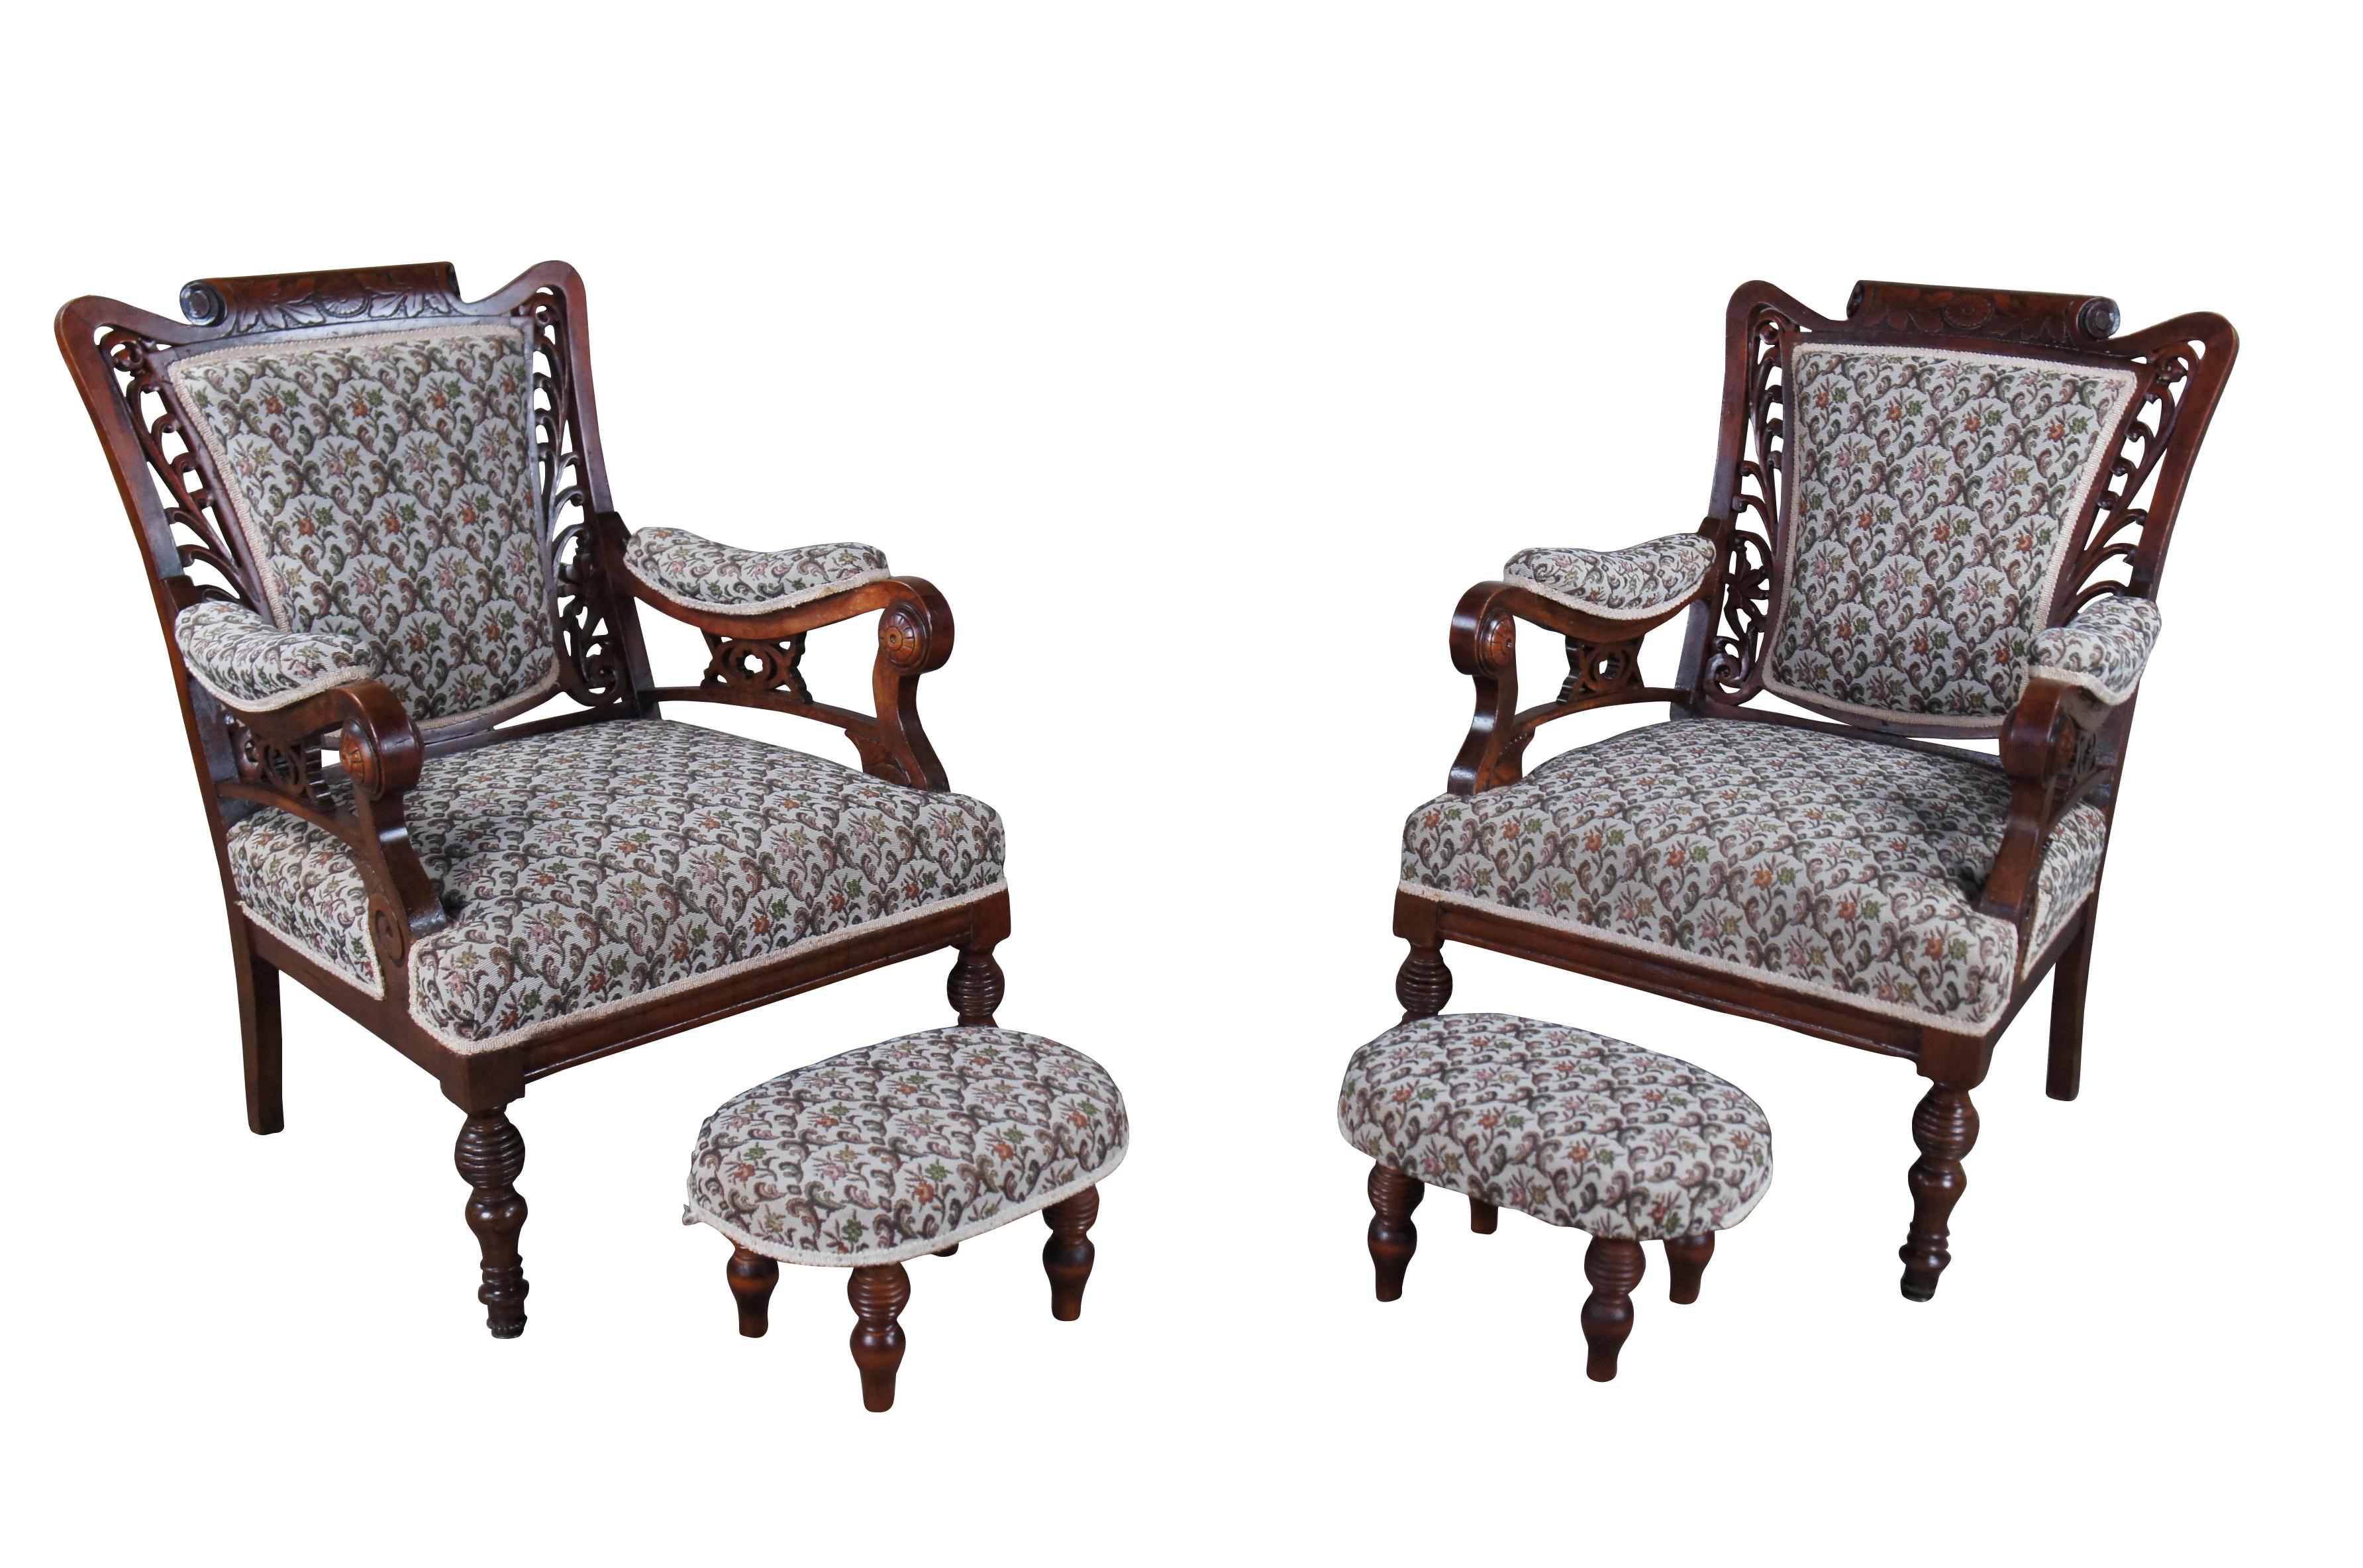 2 impressive Victorian era library, club or parlor arm chairs and ottomans. Made from mahogany with a pierced foliate back, downswept padded arms with accompanied S scroll supports, turned wheel medallions and geometric floral upholstery. Crest rail